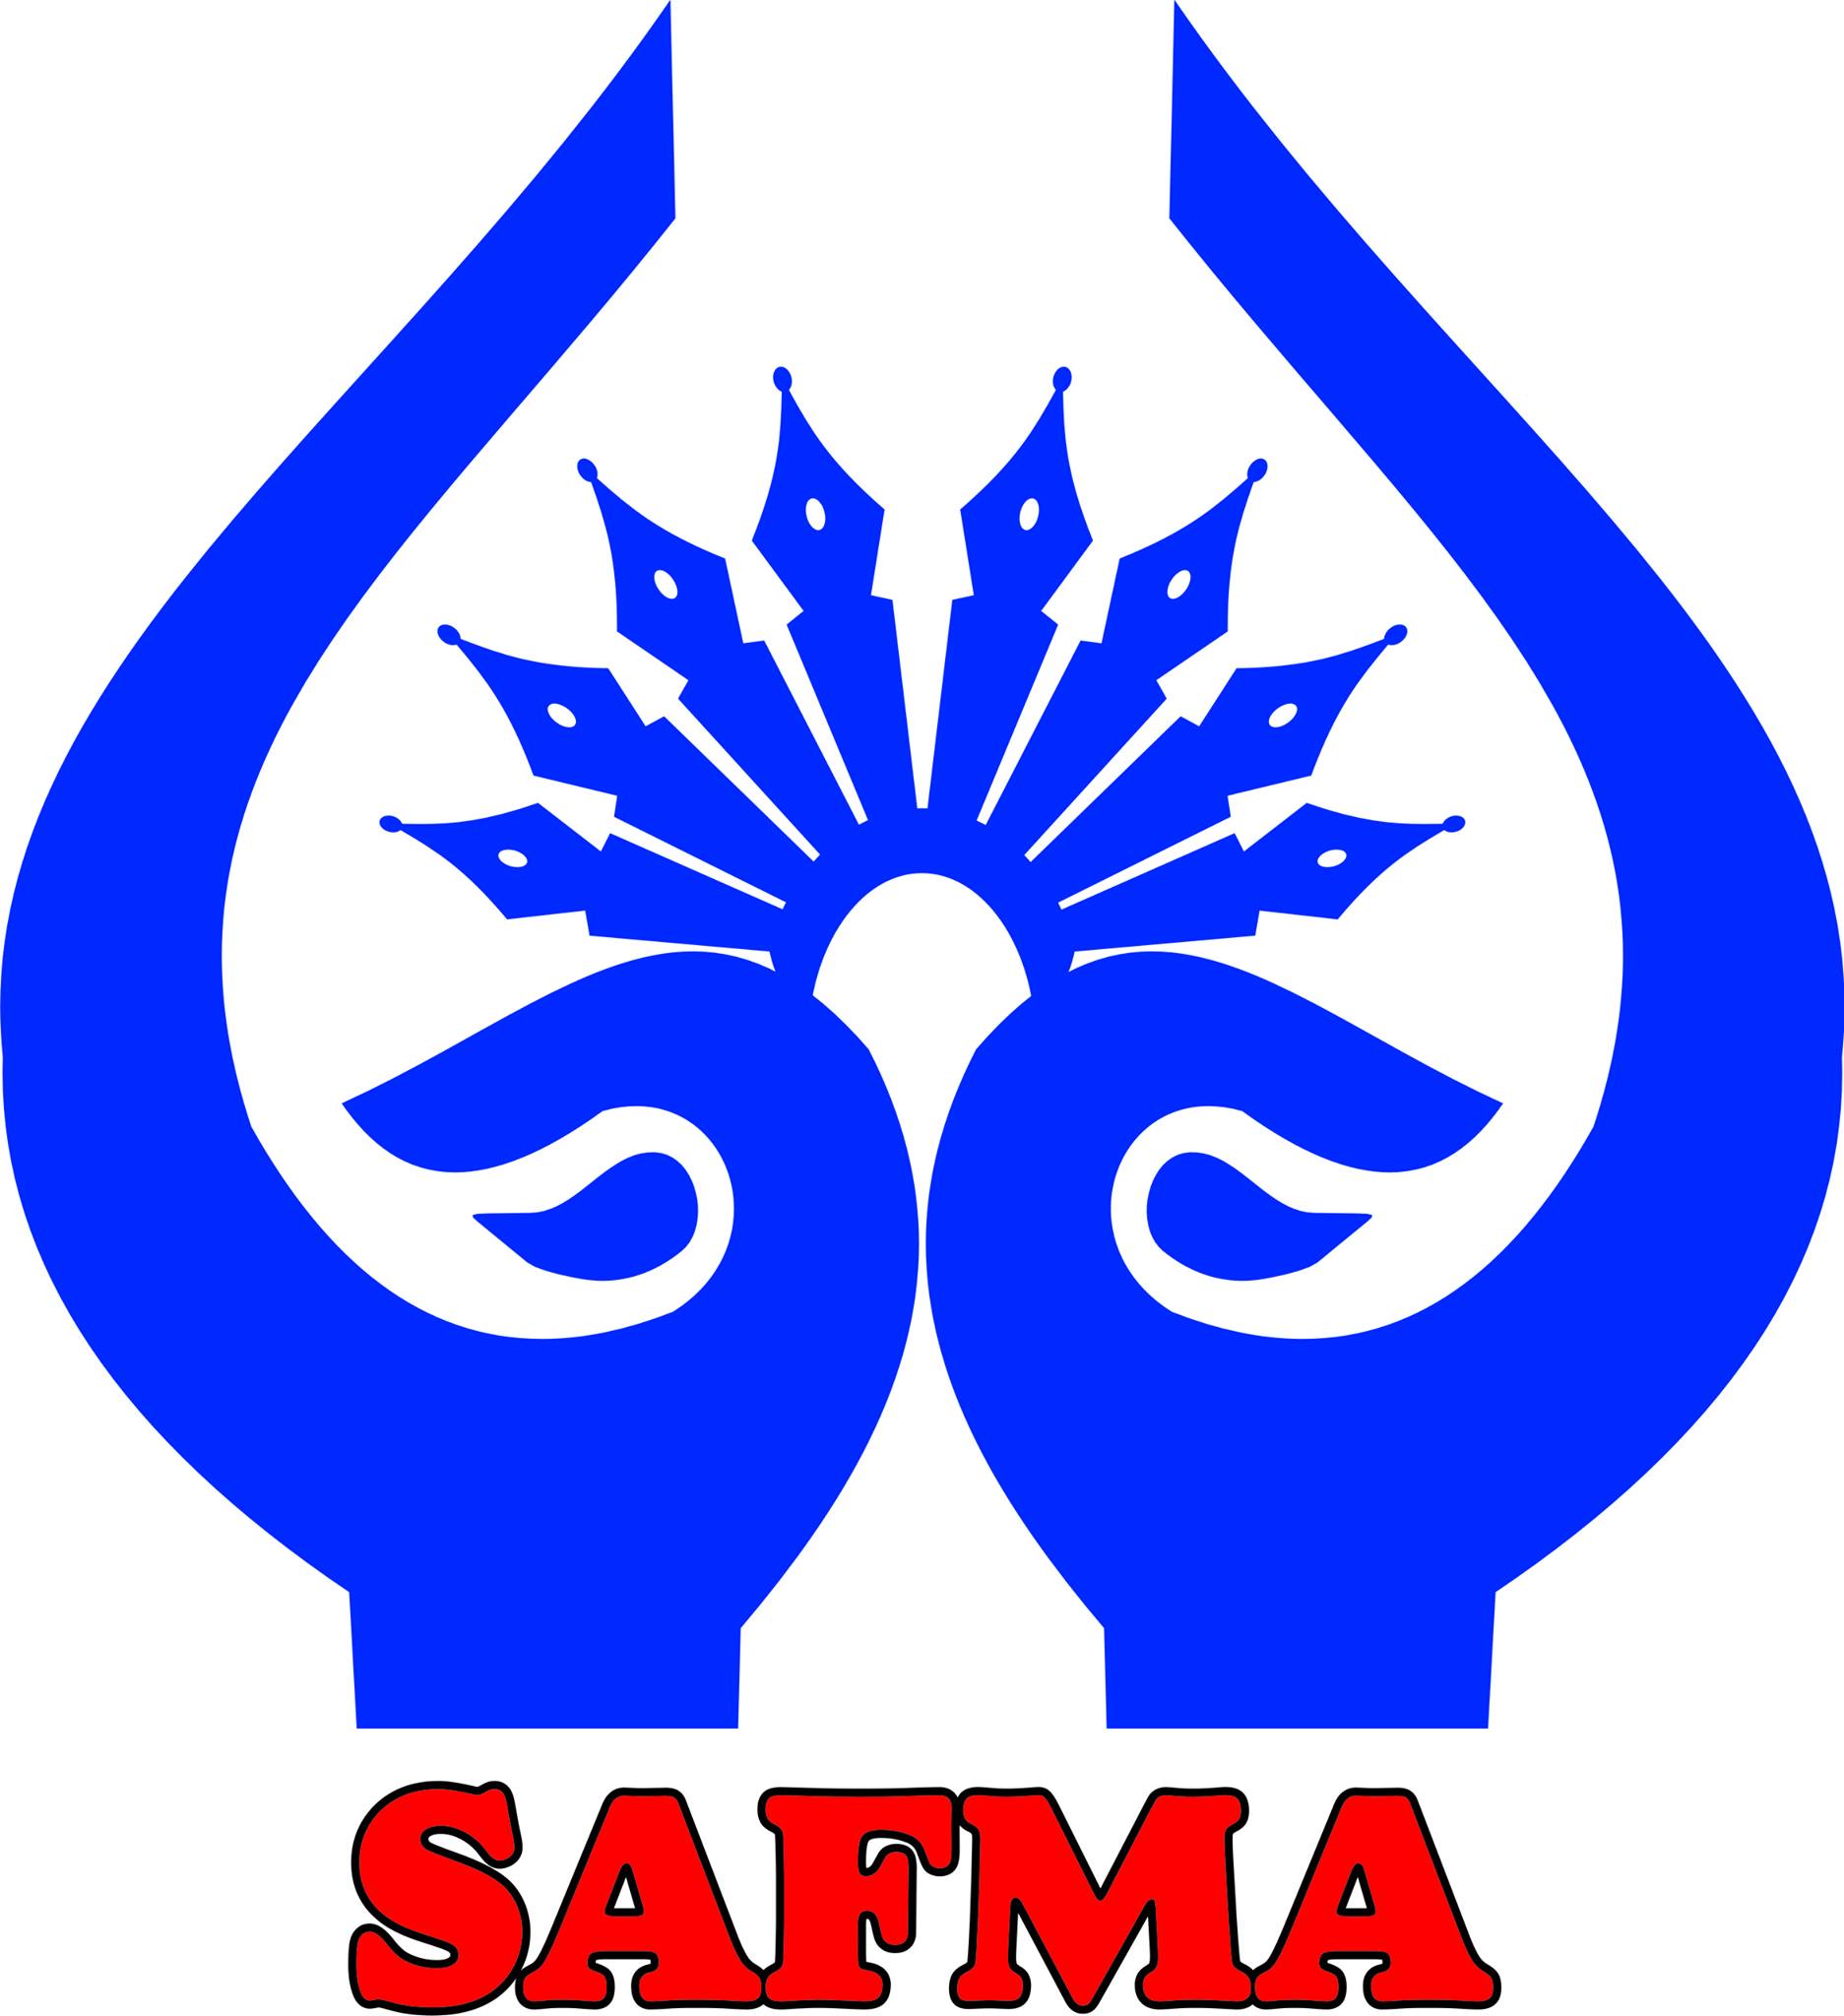 SAFMA calls for Climate Justice